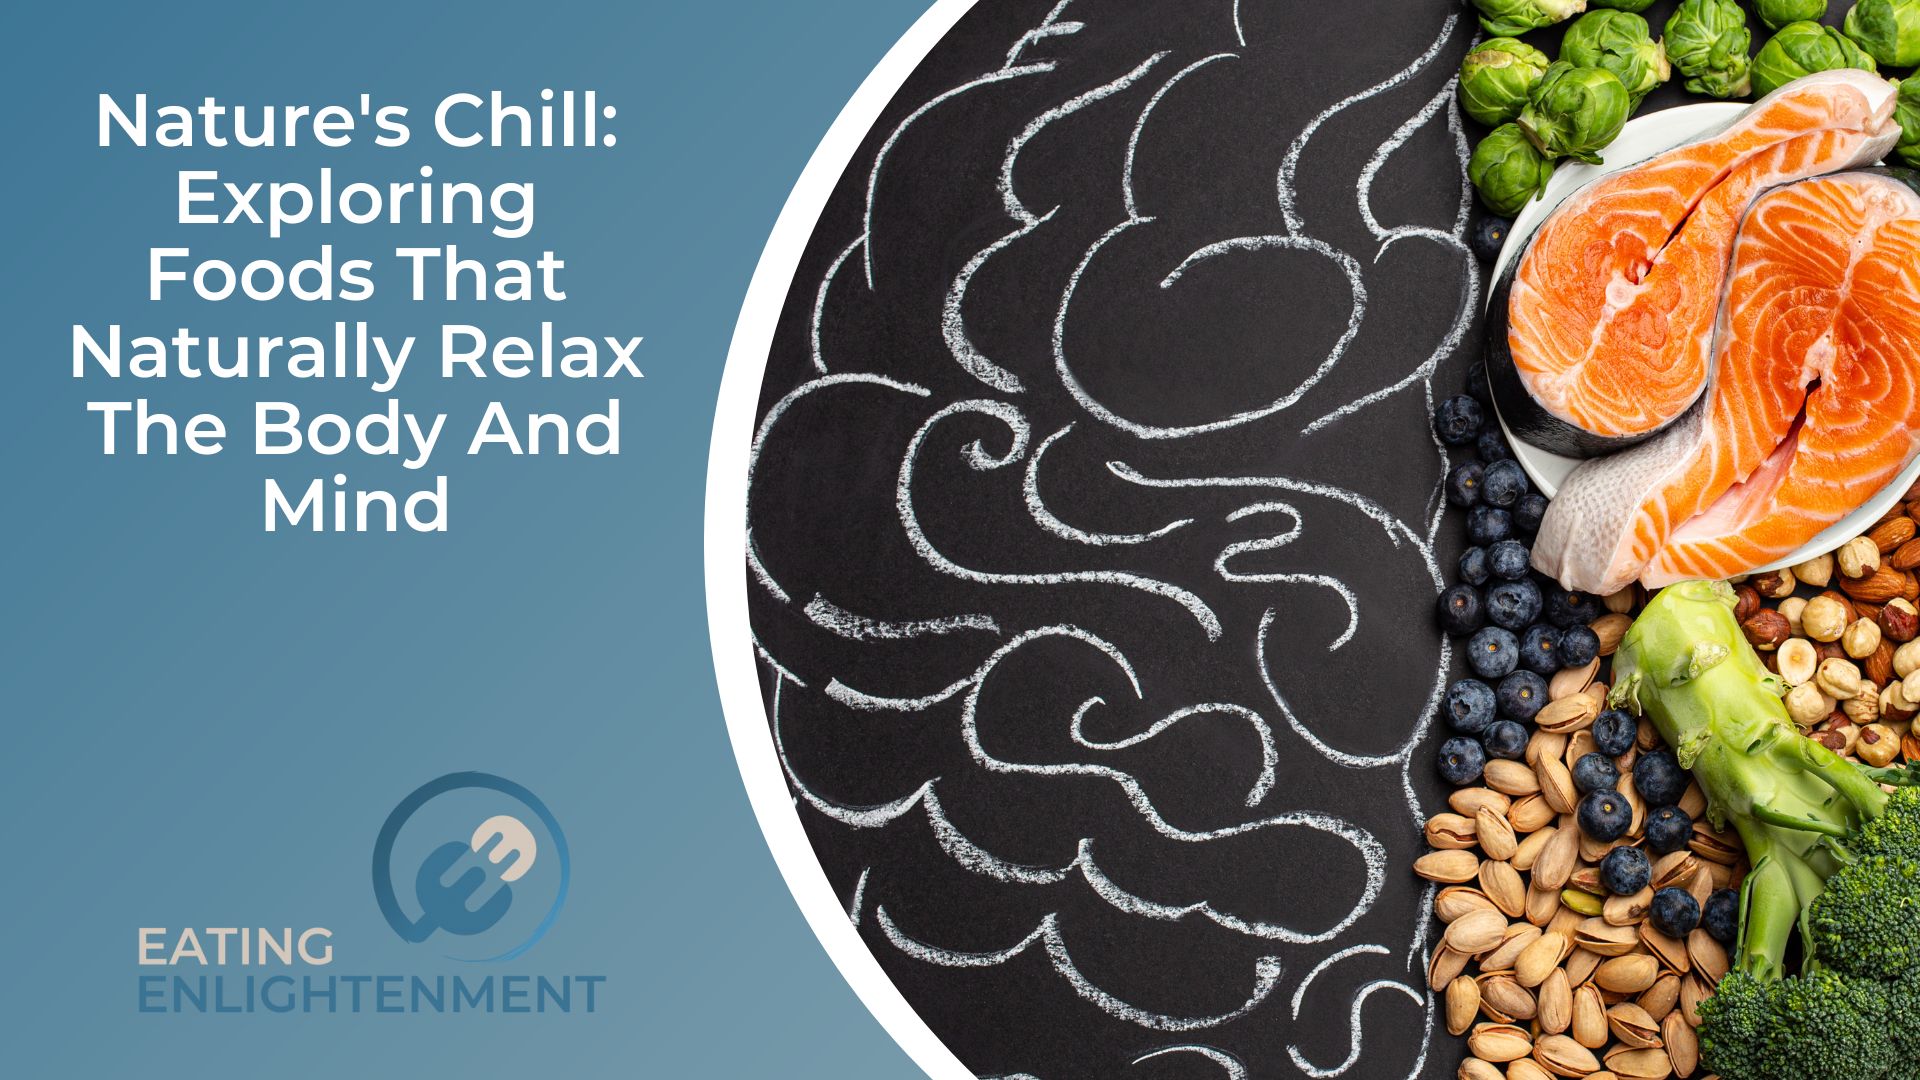 Nature's Chill Exploring Foods That Naturally Relax The Body And Mind